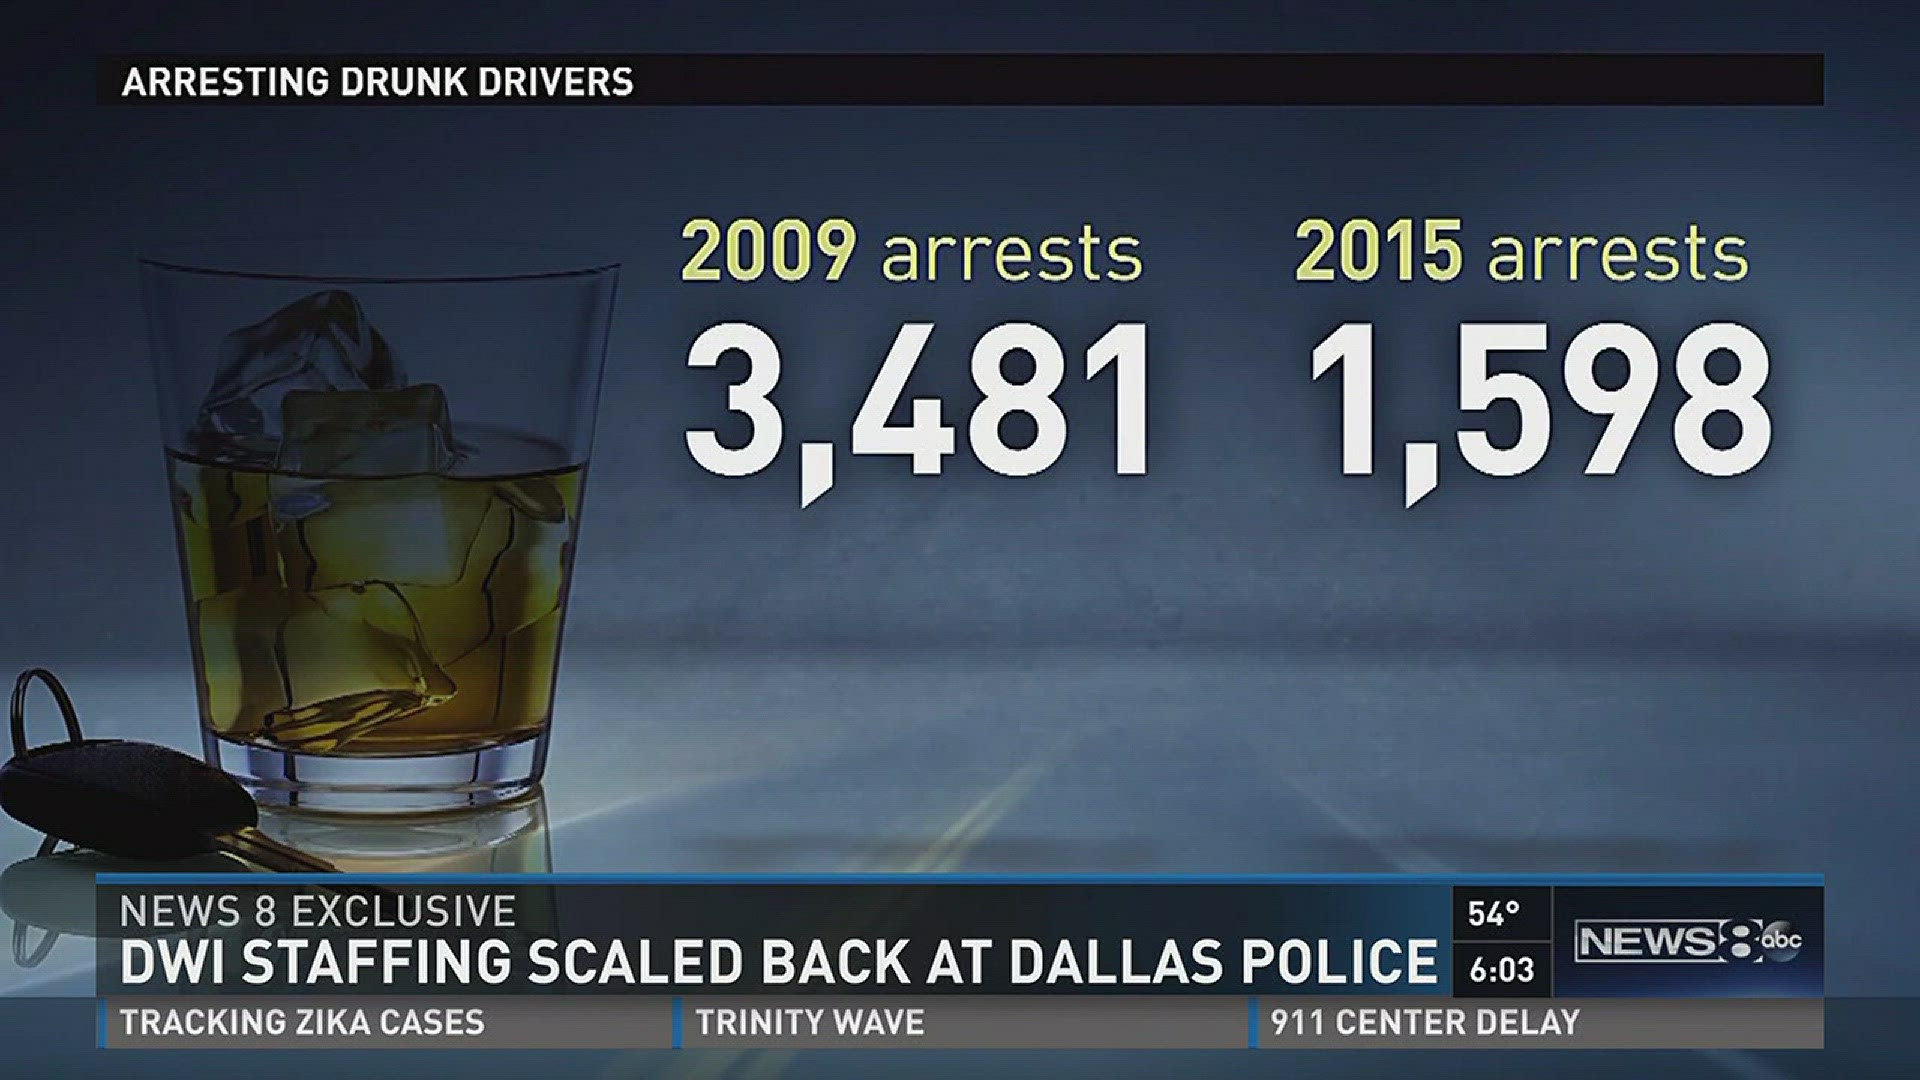 NEWS 8 EXCLUSIVE: DWI arrests made by Dallas Police have plummeted as the department trims its staff. Tanya Eiserer reports.